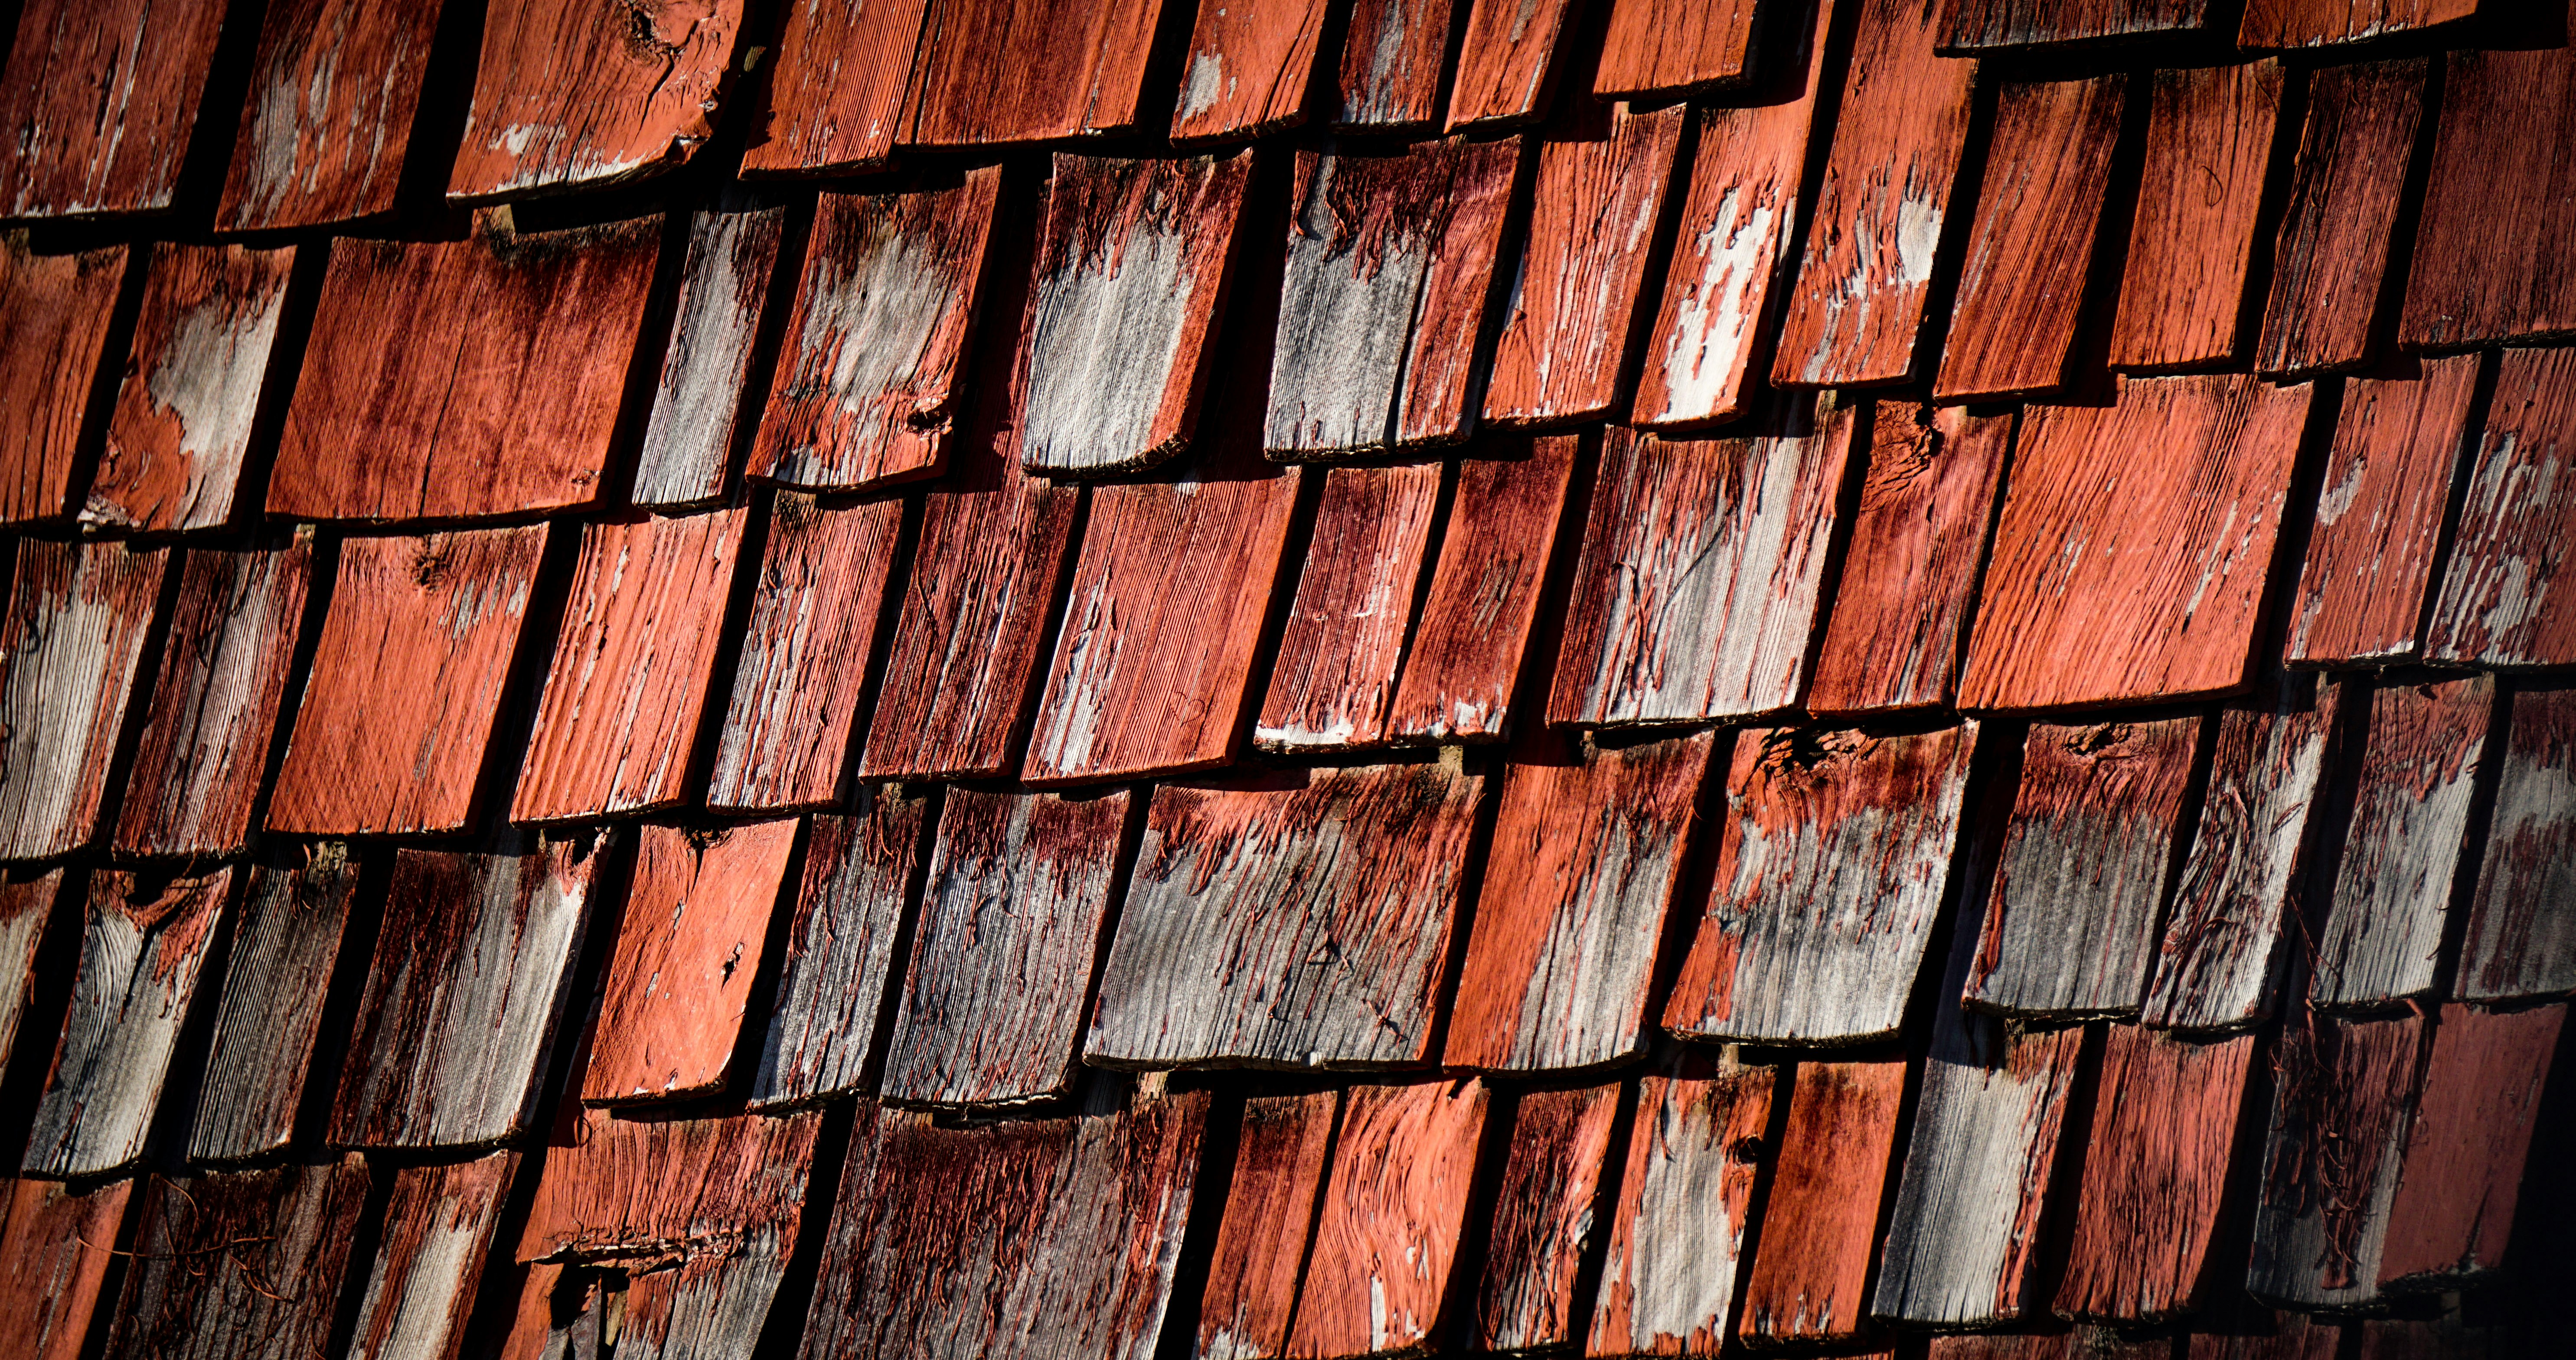 brown and black roof tiles